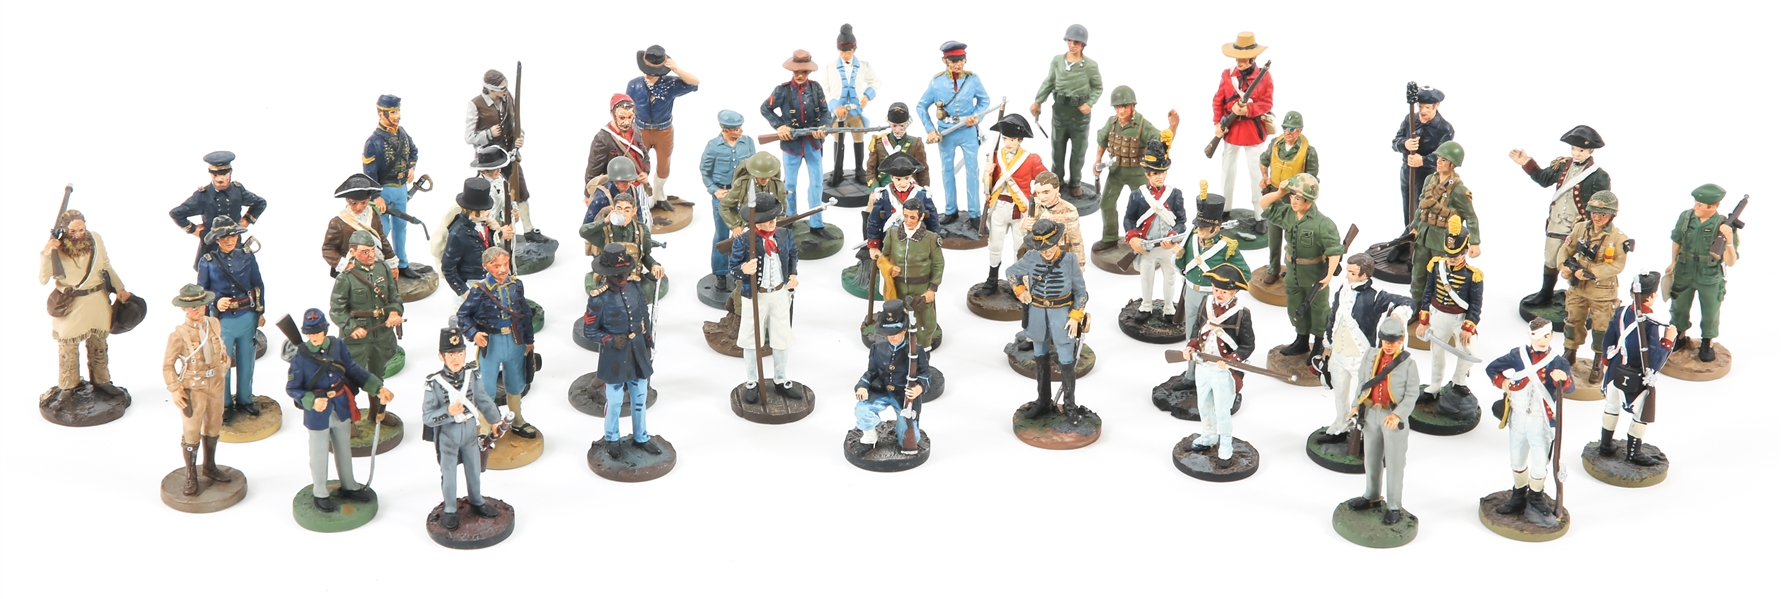 AMERICAN MILITARY HISTORICAL SOCIETY MINIATURE SOLDIERS